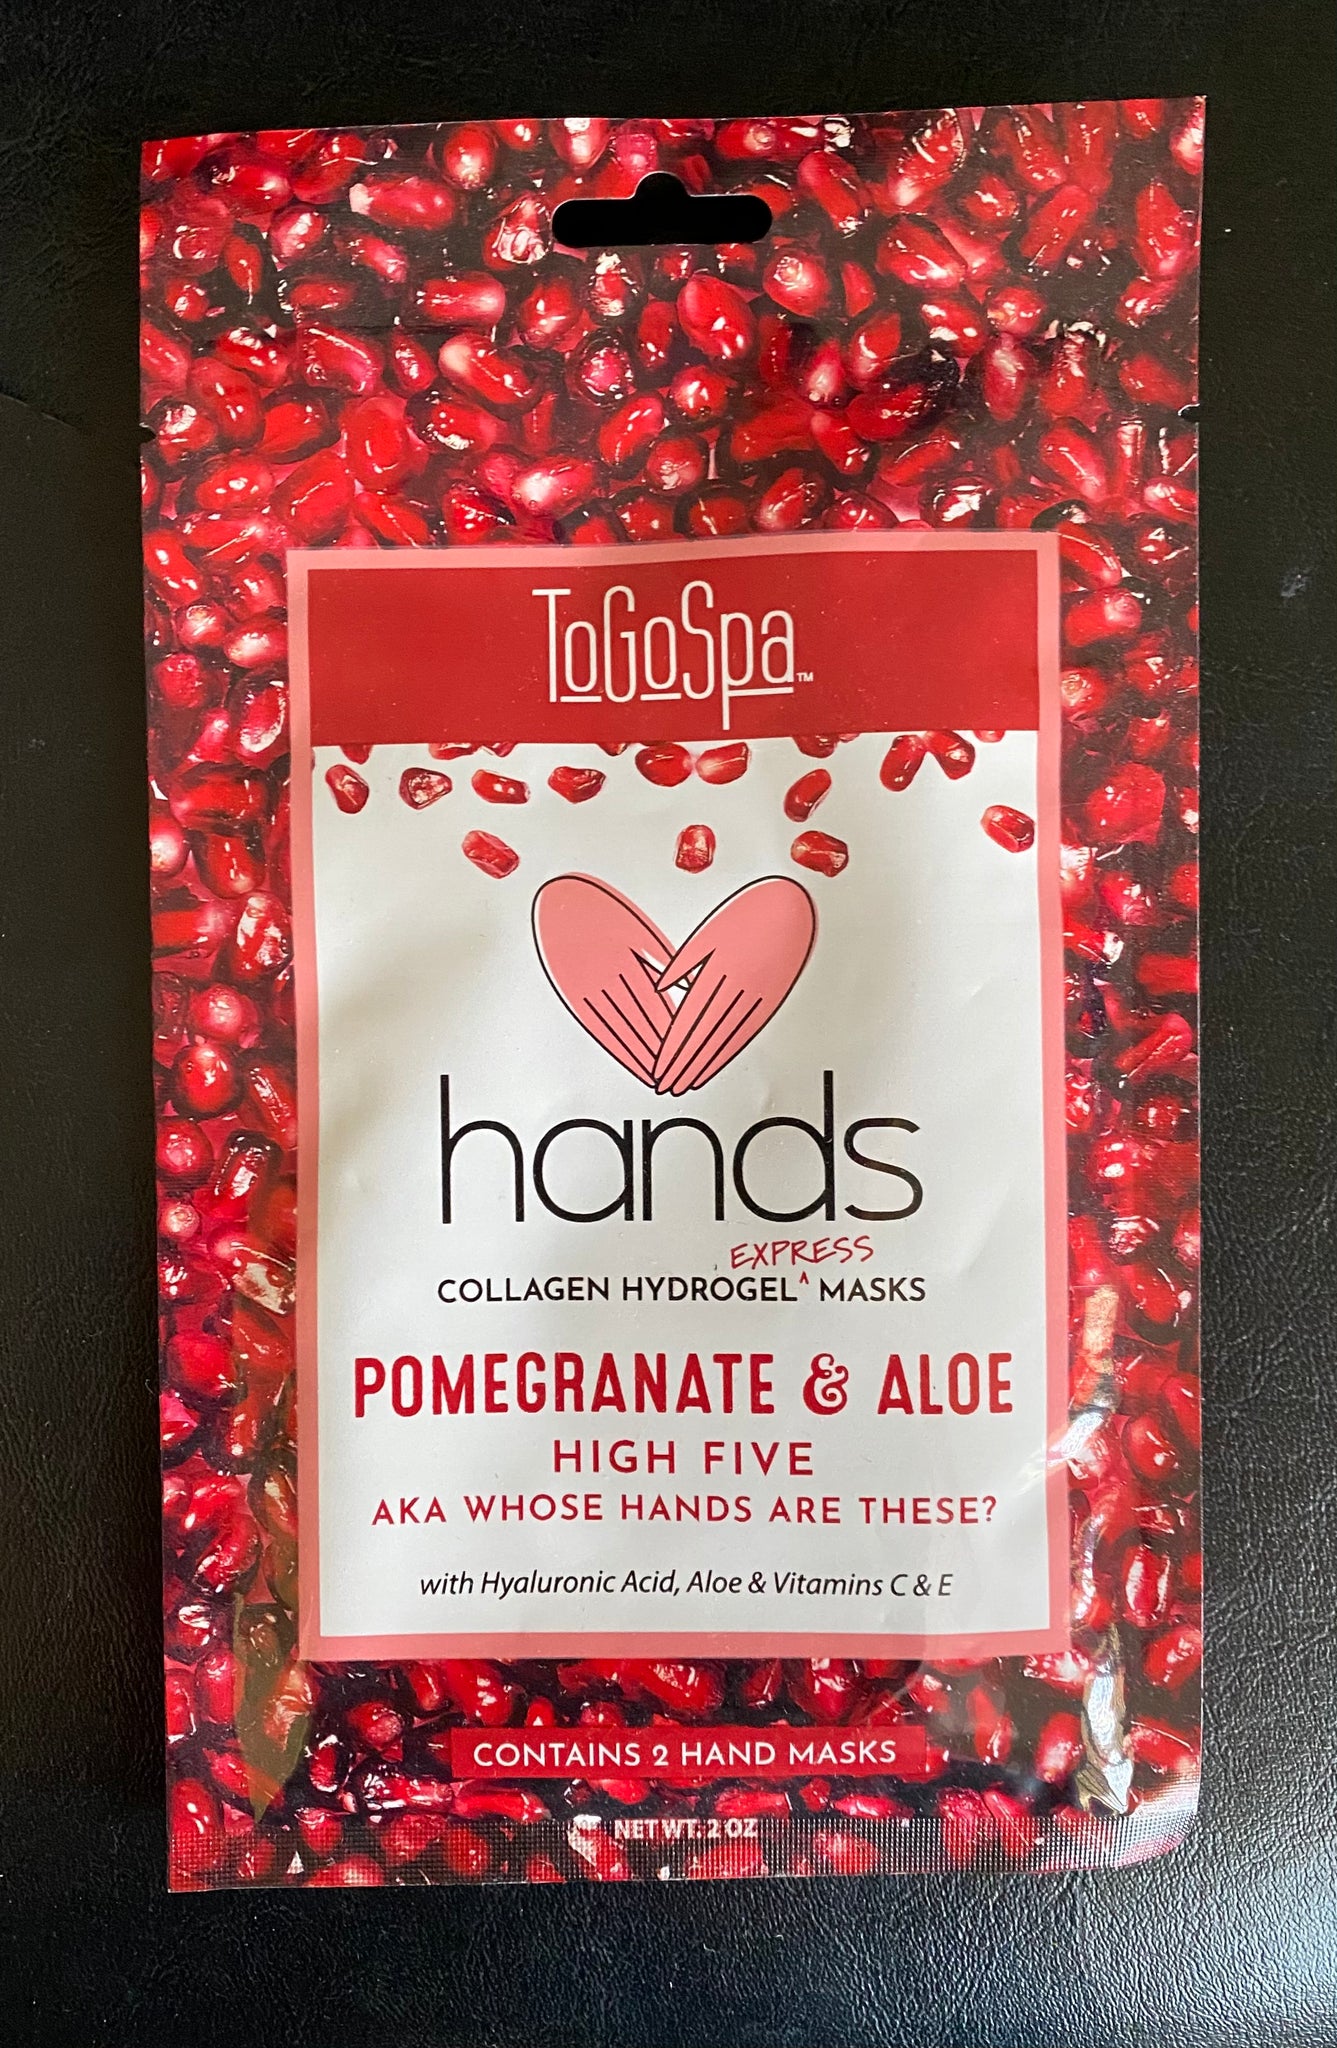 Pomegranate & Aloe HANDS by To GO Spa